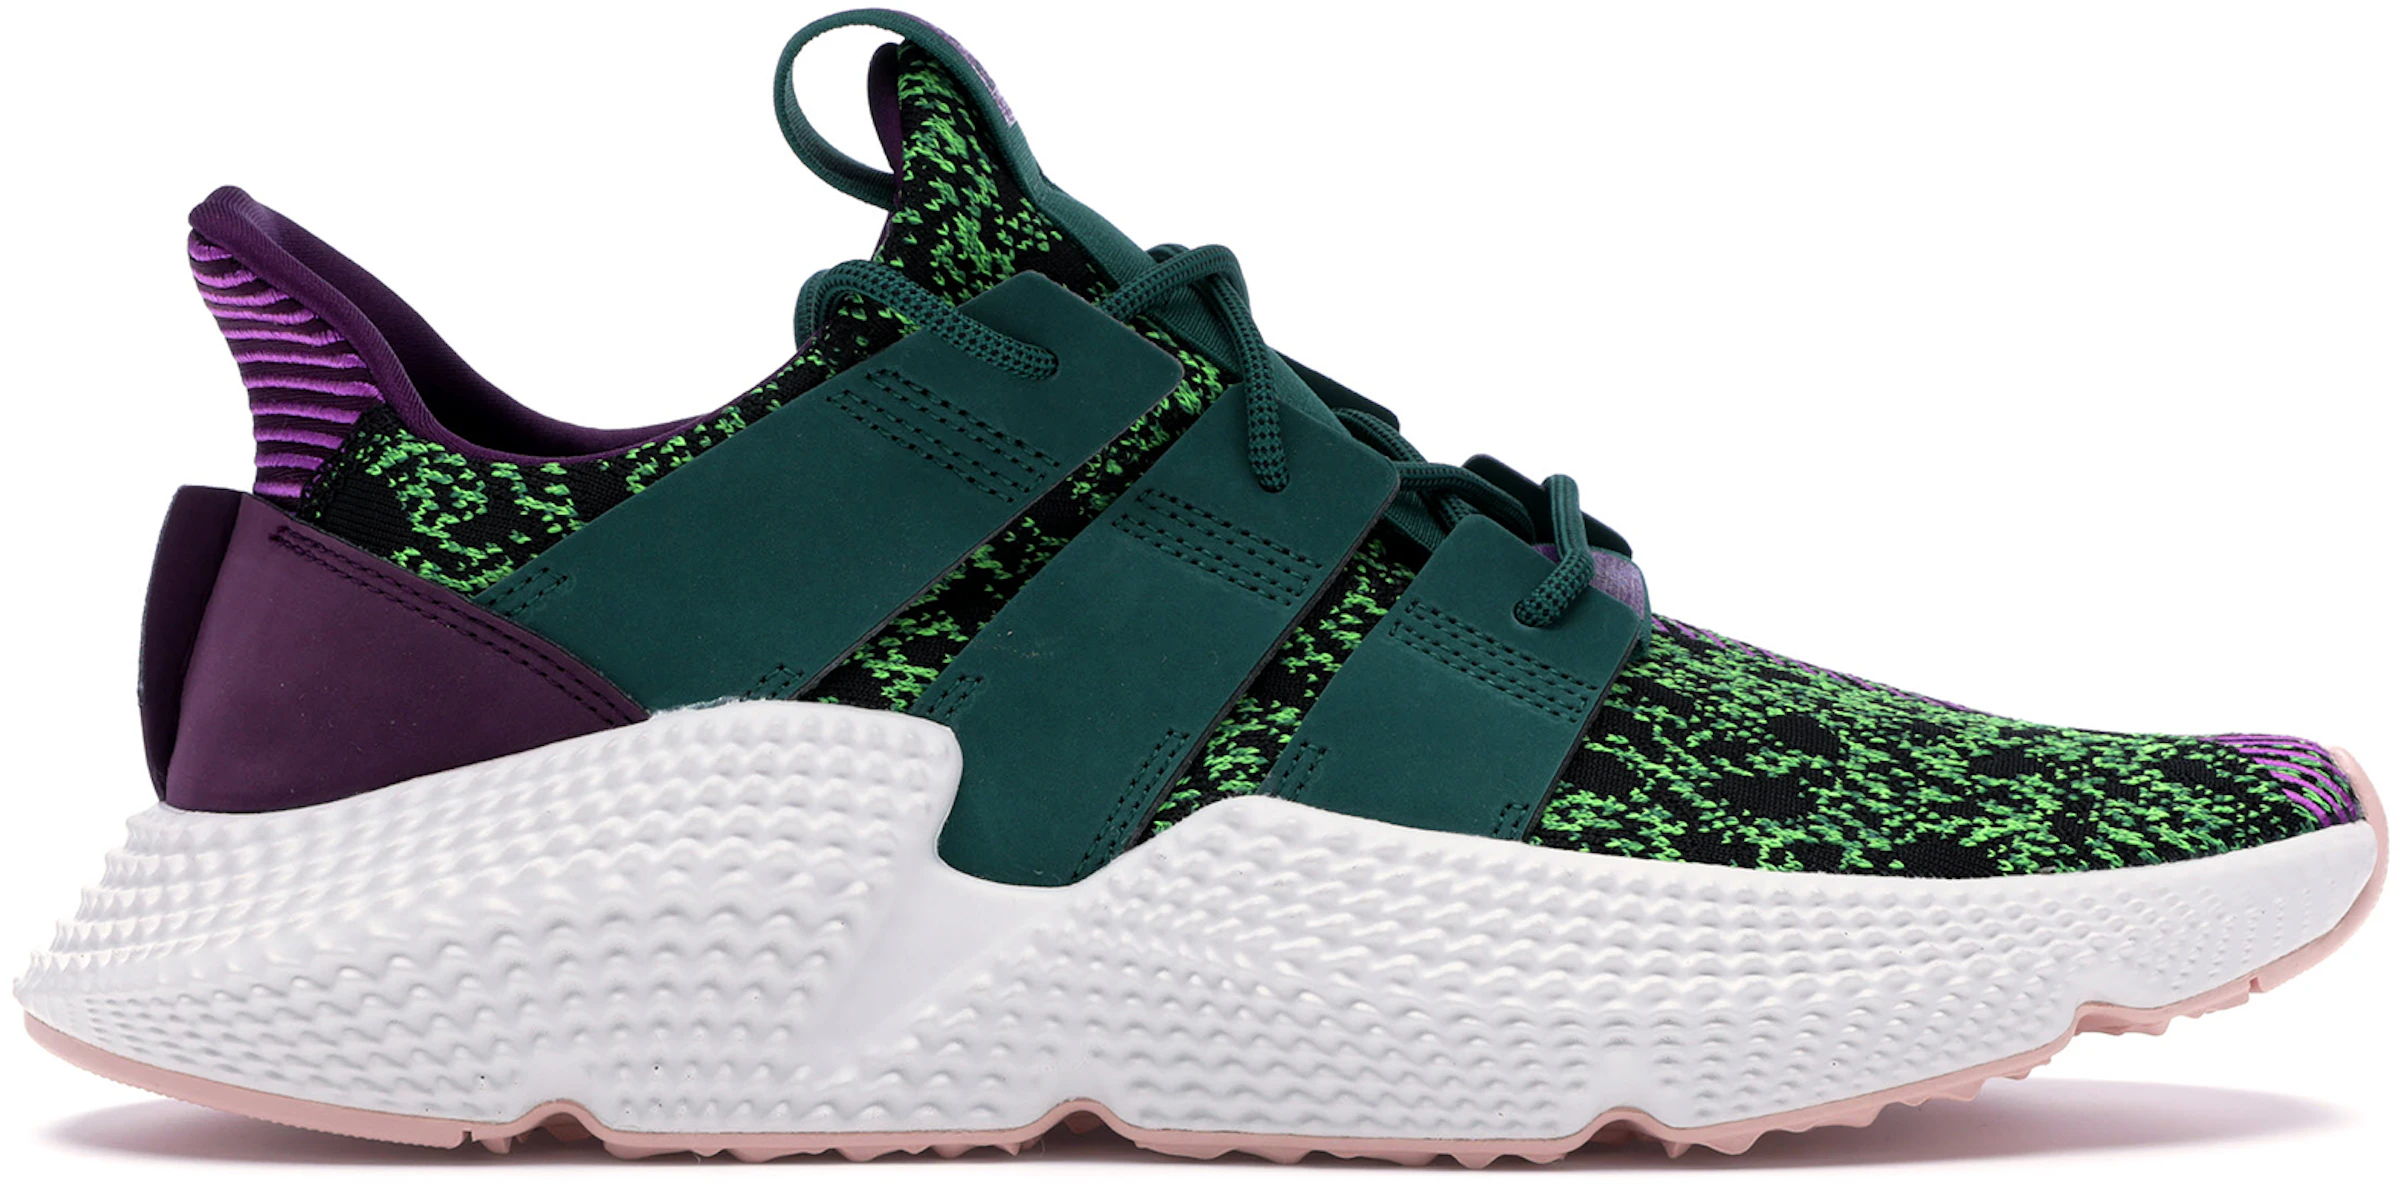 adidas Prophere Dragon Ball Z Cell - D97053 - US